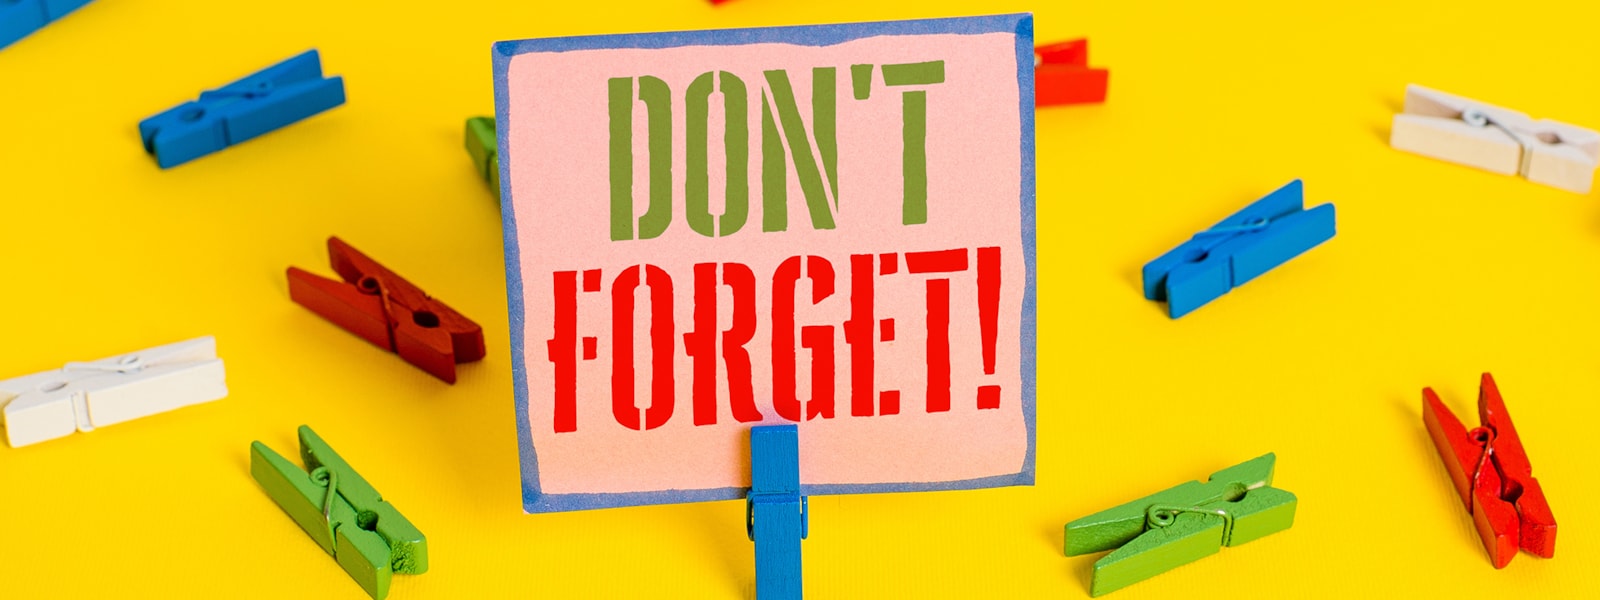 "Don't forget" sign in front of colorful clothes pins. 